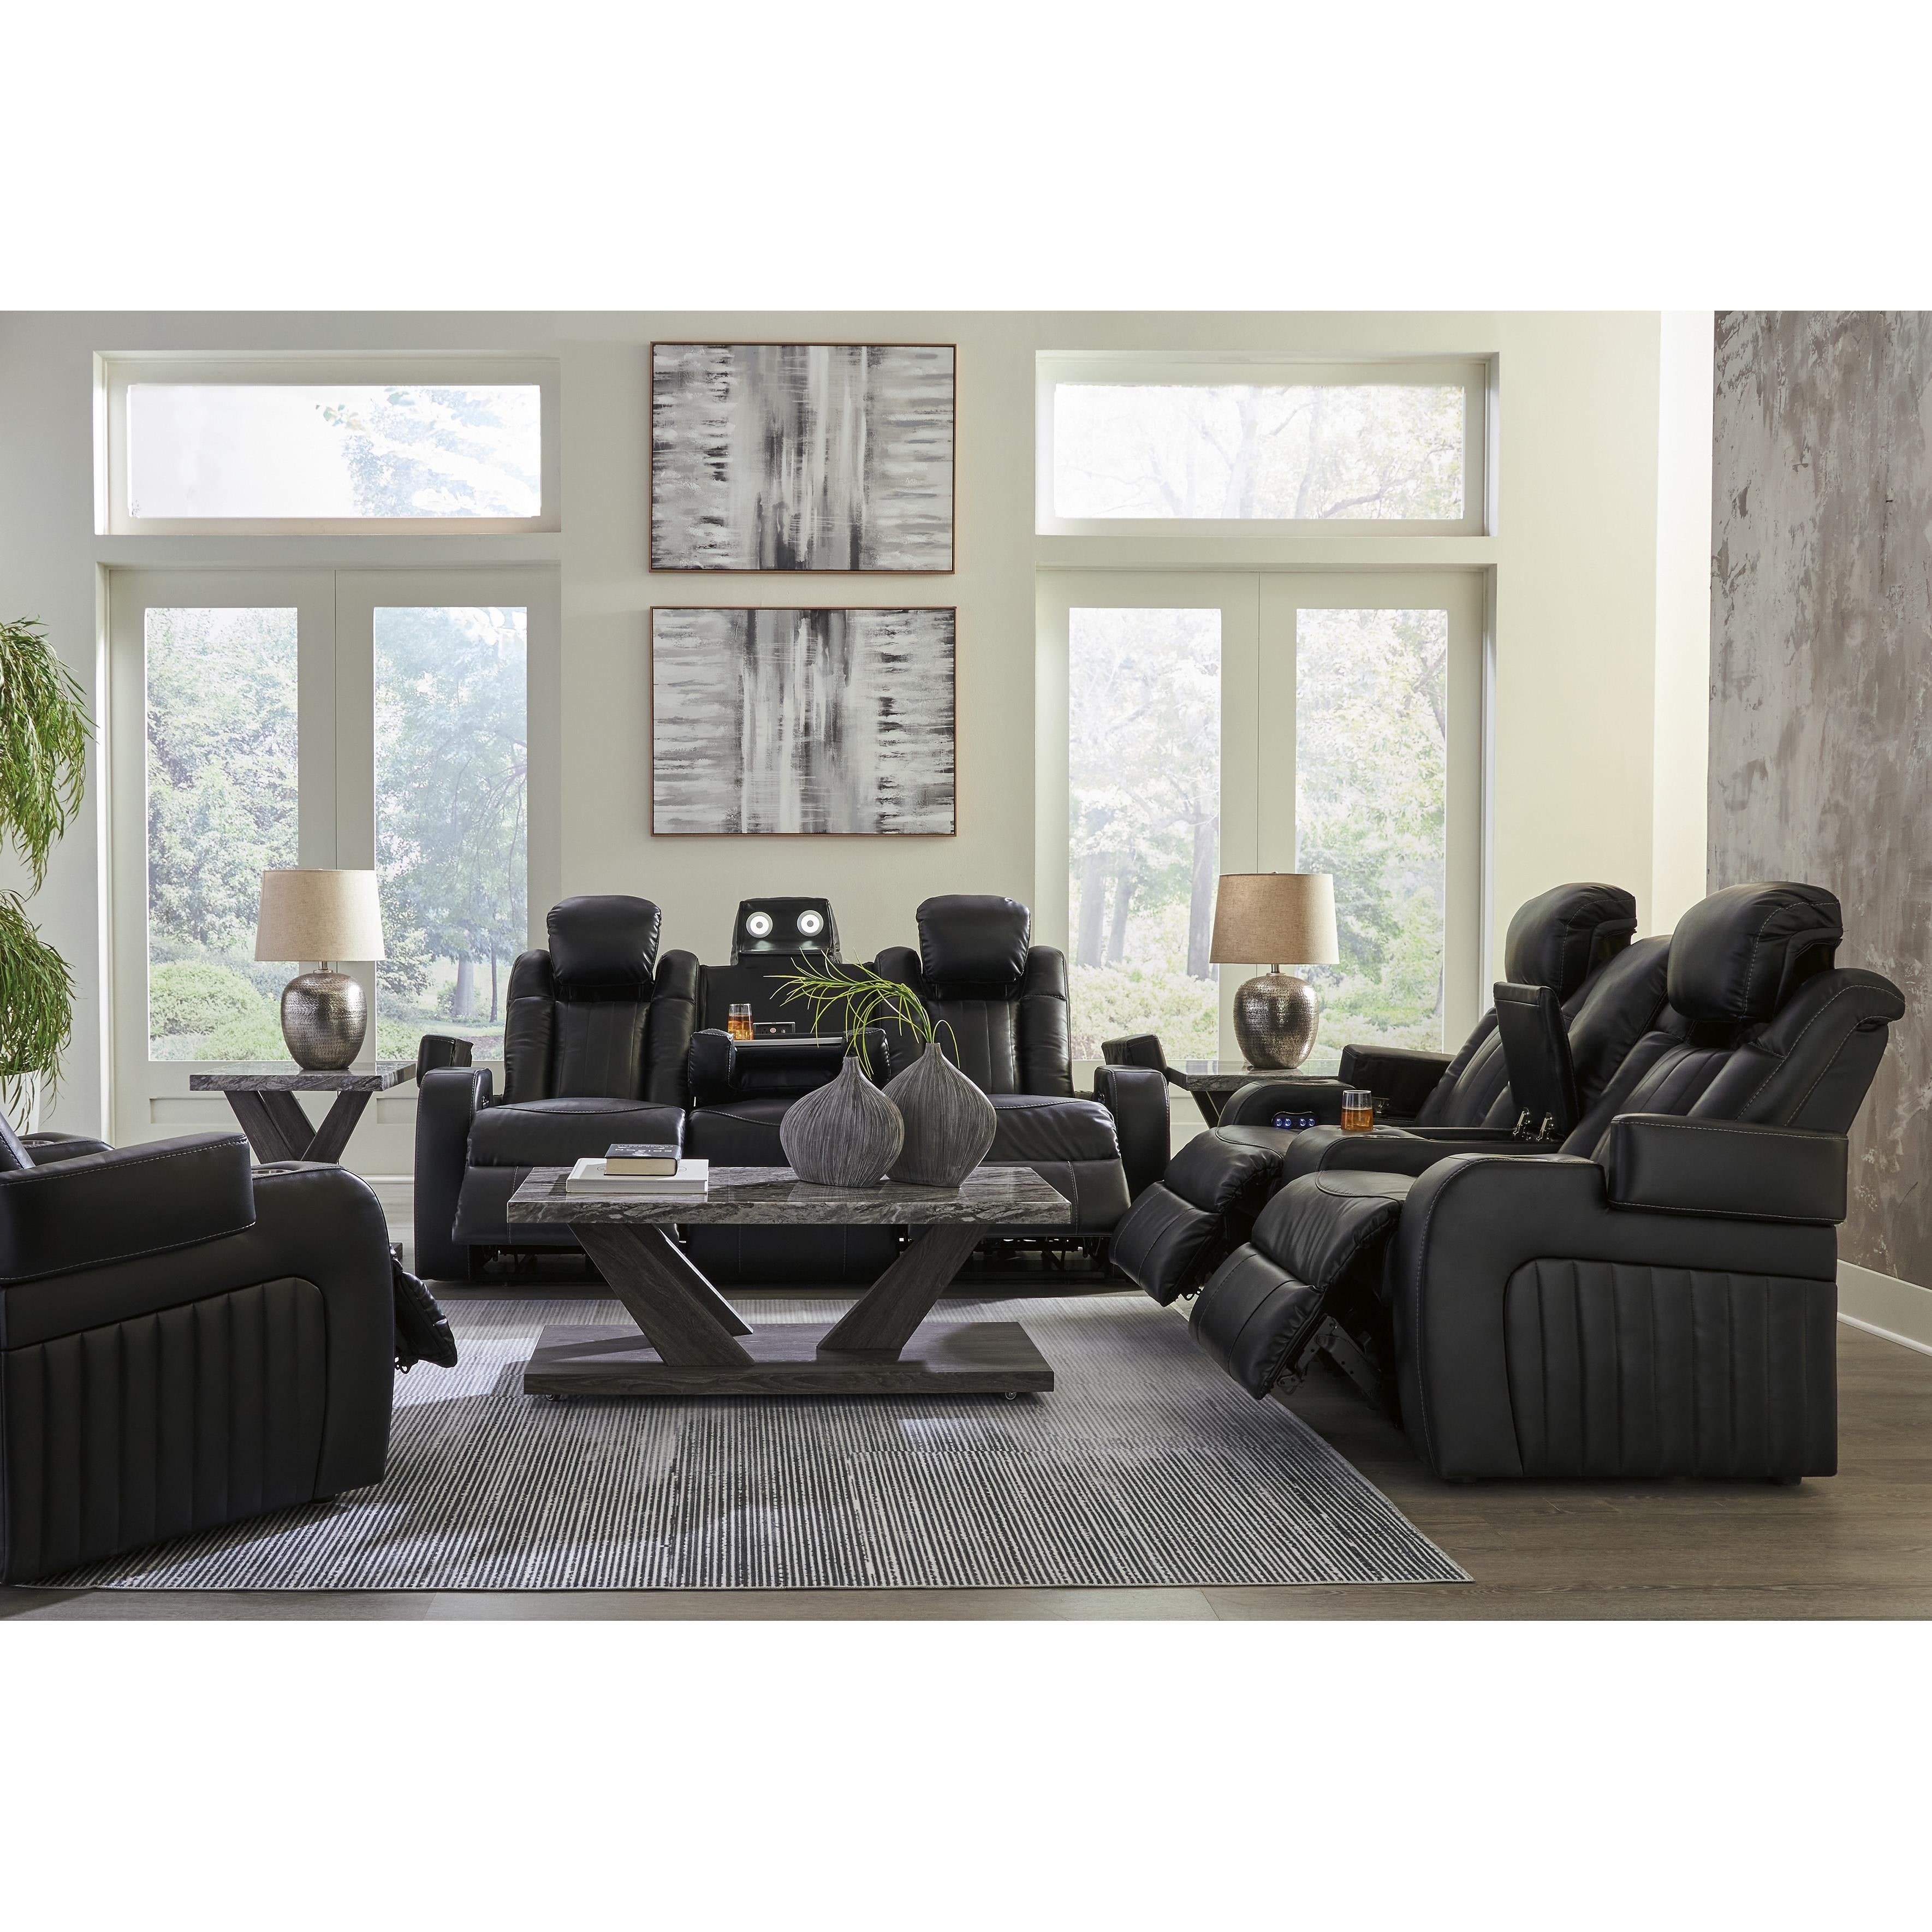 Signature Design by Ashley Caveman Den Power Reclining Leather Look Sofa 9070315 IMAGE 18